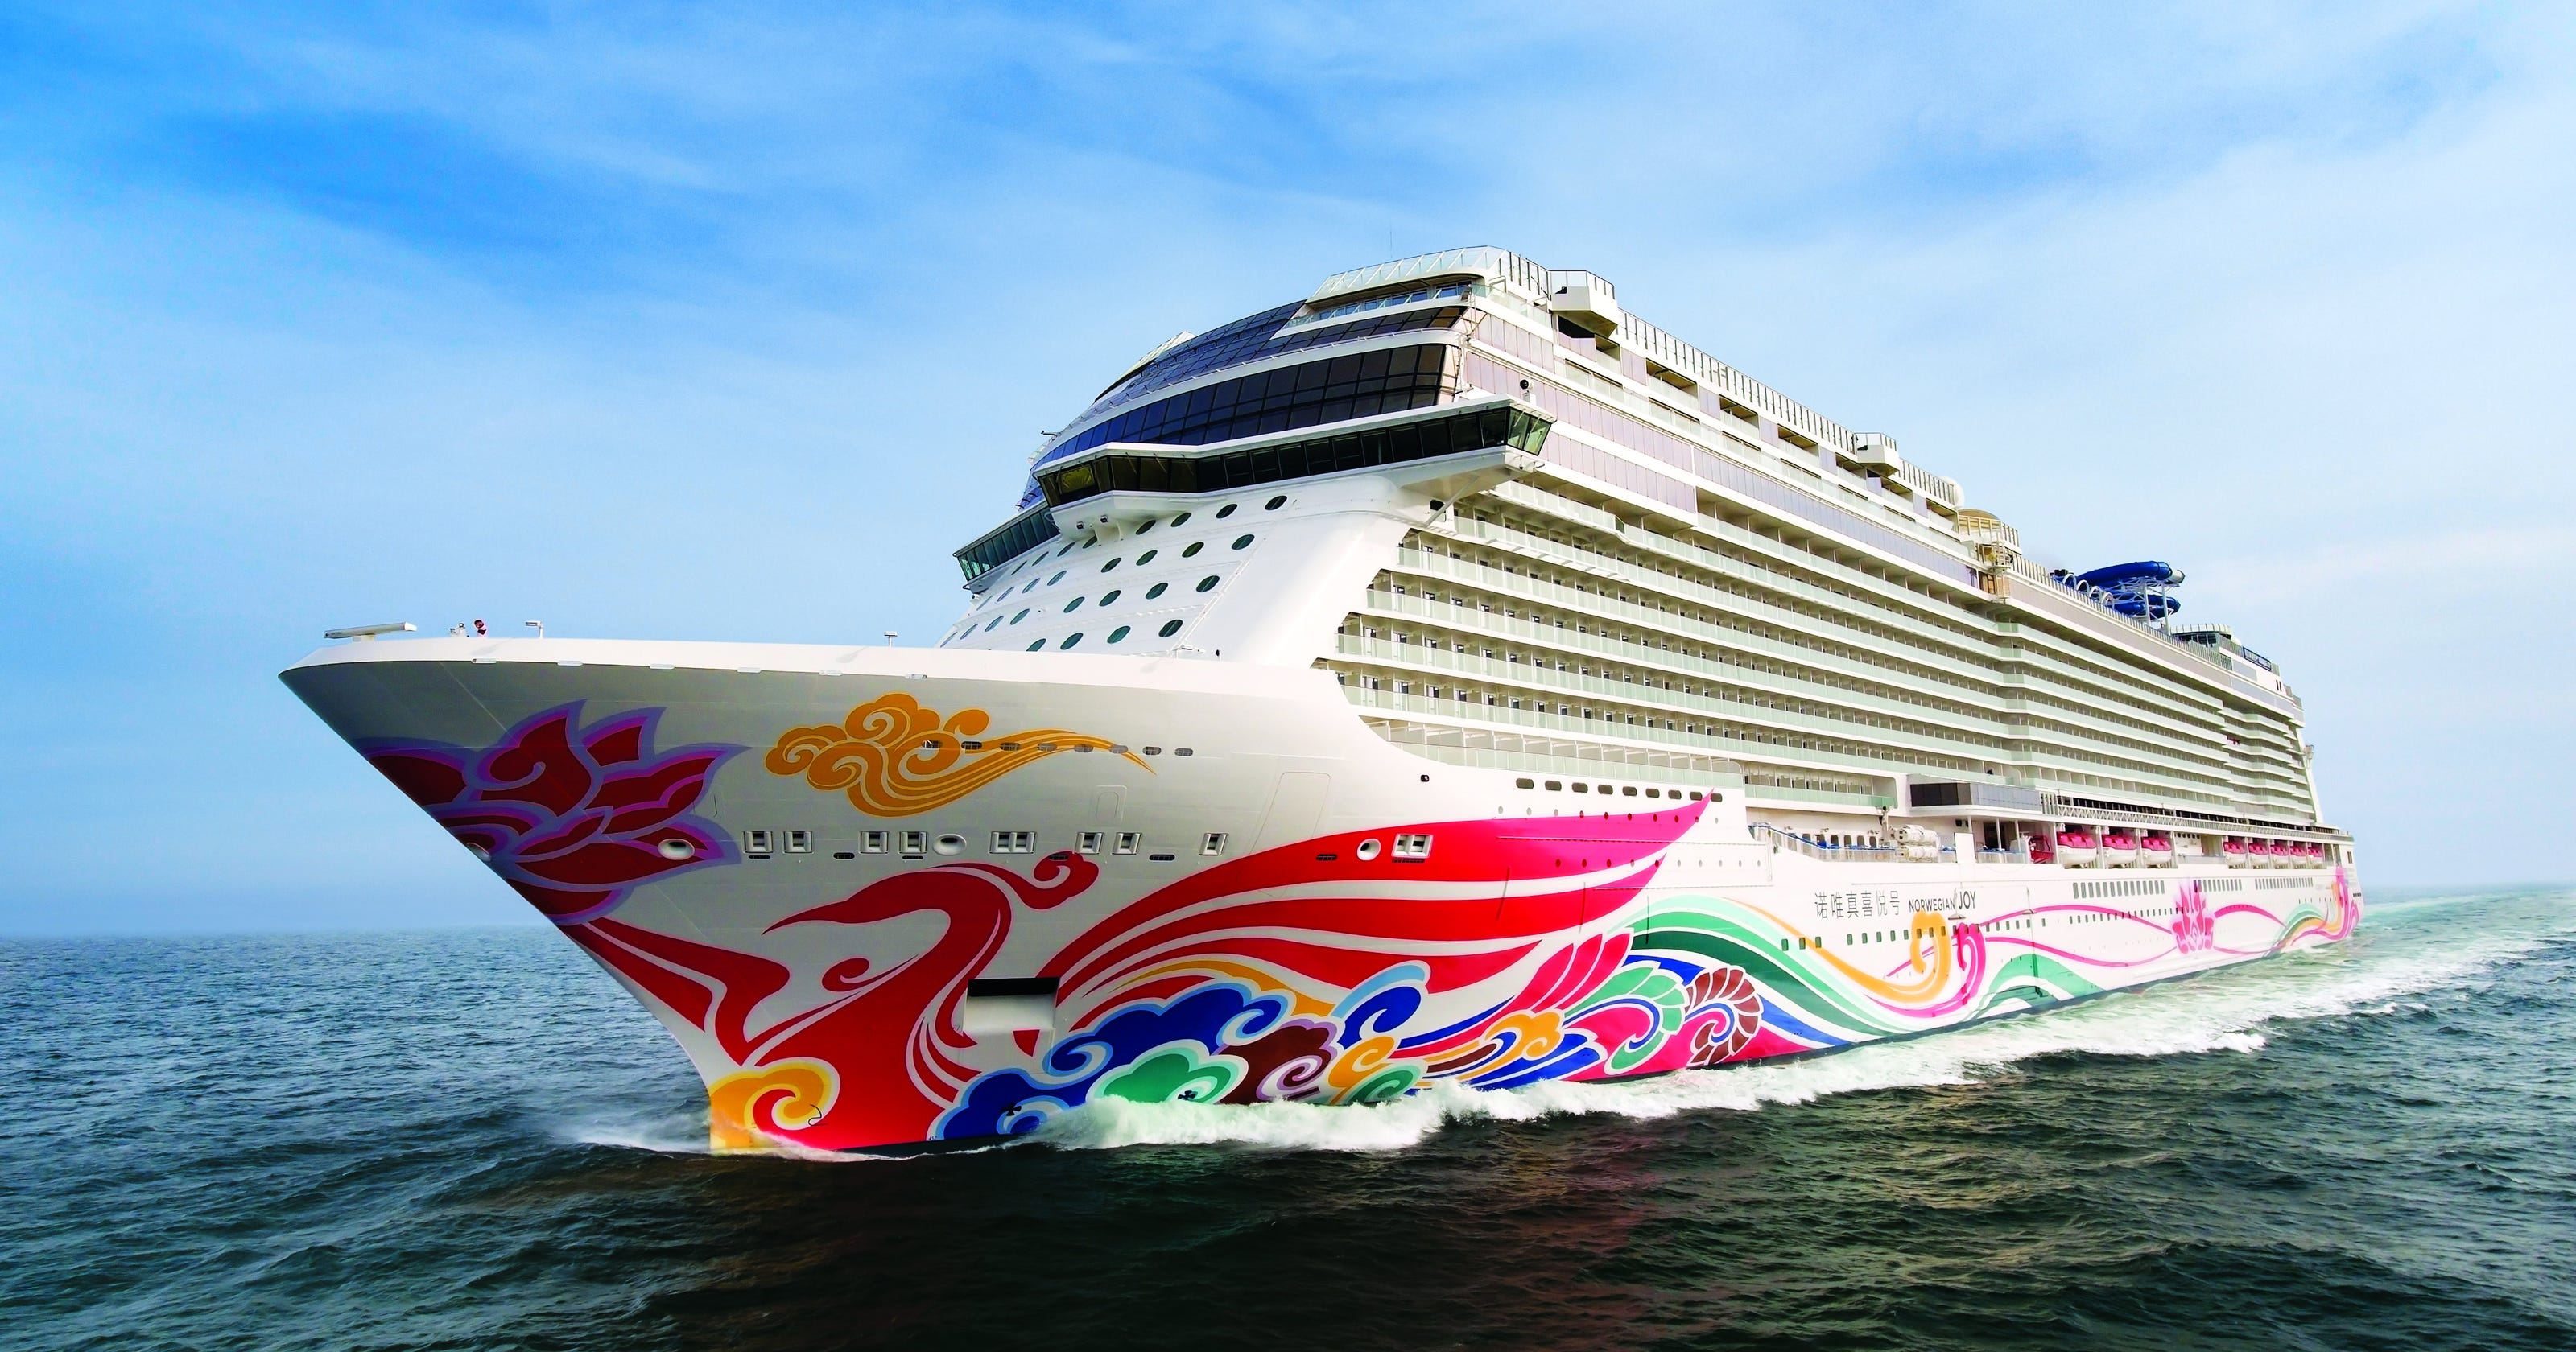 Norwegian Cruise Line's fleet and home ports, by the numbers